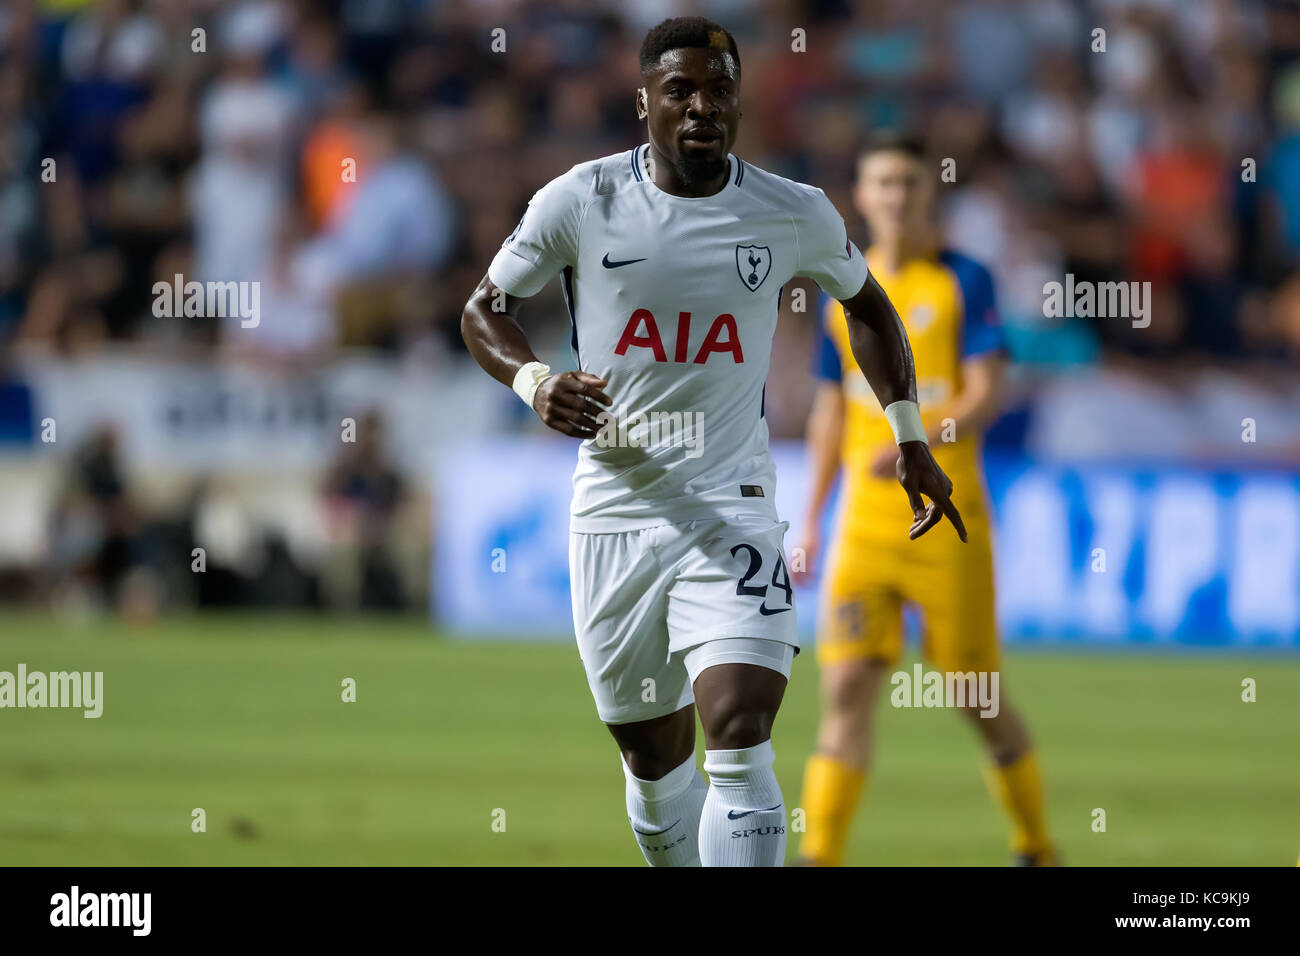 Nicosia, Cyprus - Semptember 26, 2017: Player of Tottenham Serge Aurier in action during the UEFA Champions League game between APOEL VS Tottenham Hot Stock Photo